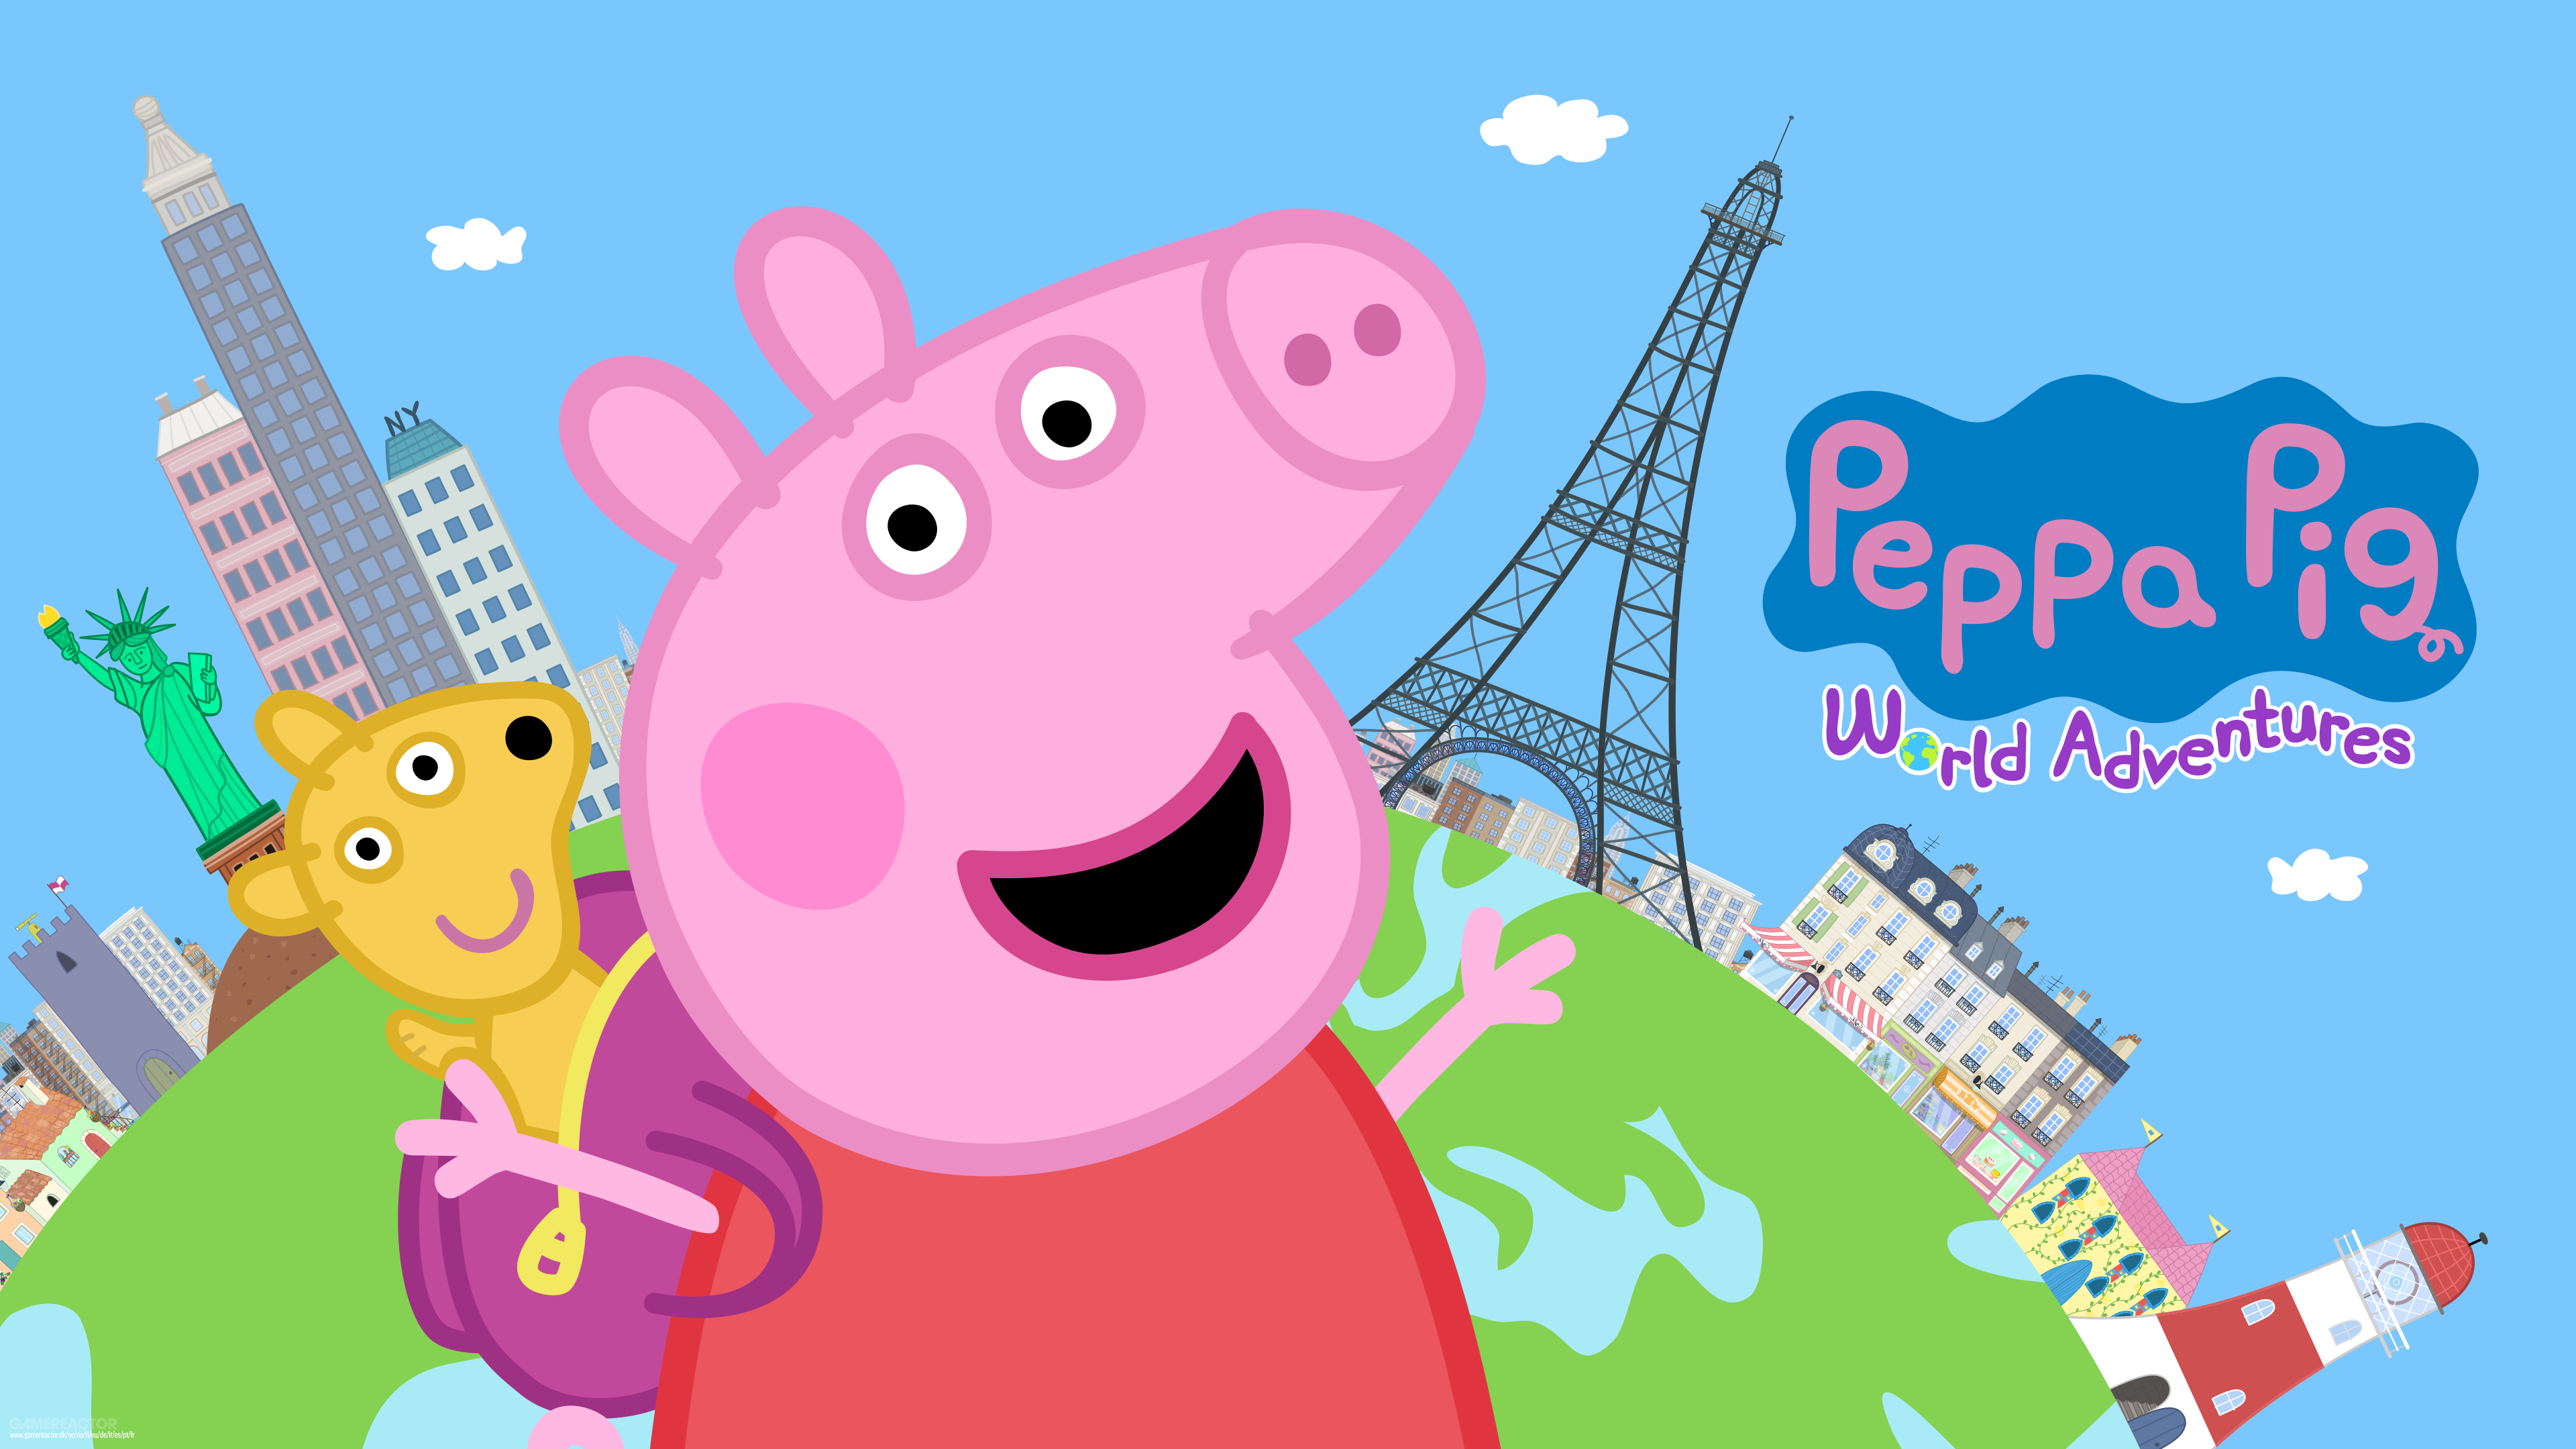 This is how Peppa Pig and her family travel the world with Peppa Pig: A World of Adventures